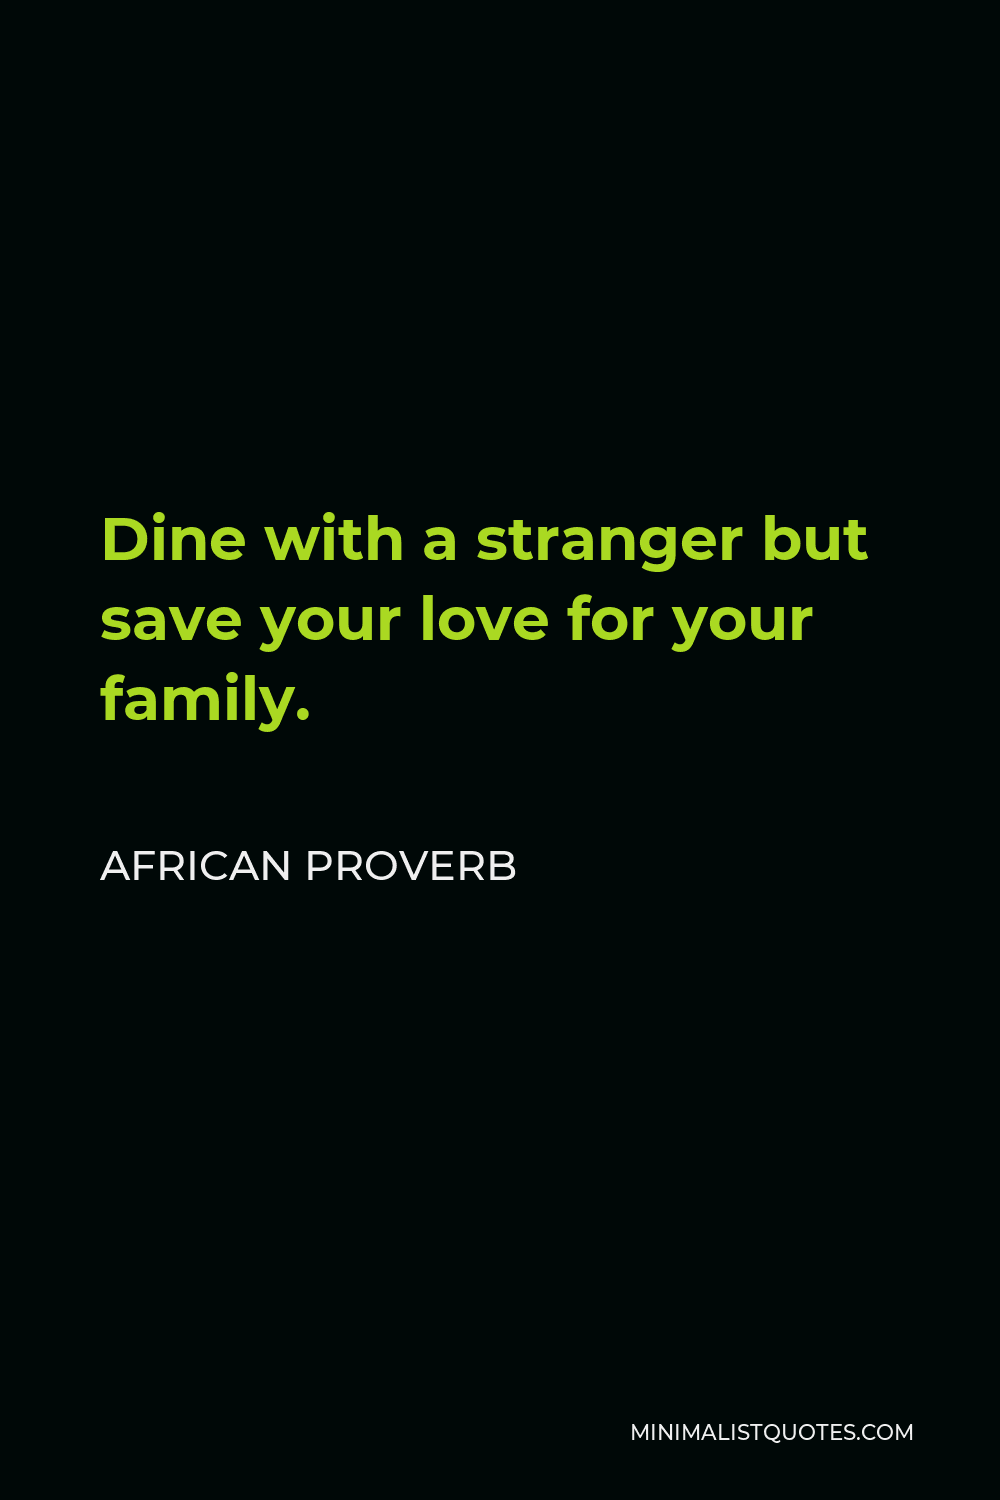 African Proverb Quote - Dine with a stranger but save your love for your family.